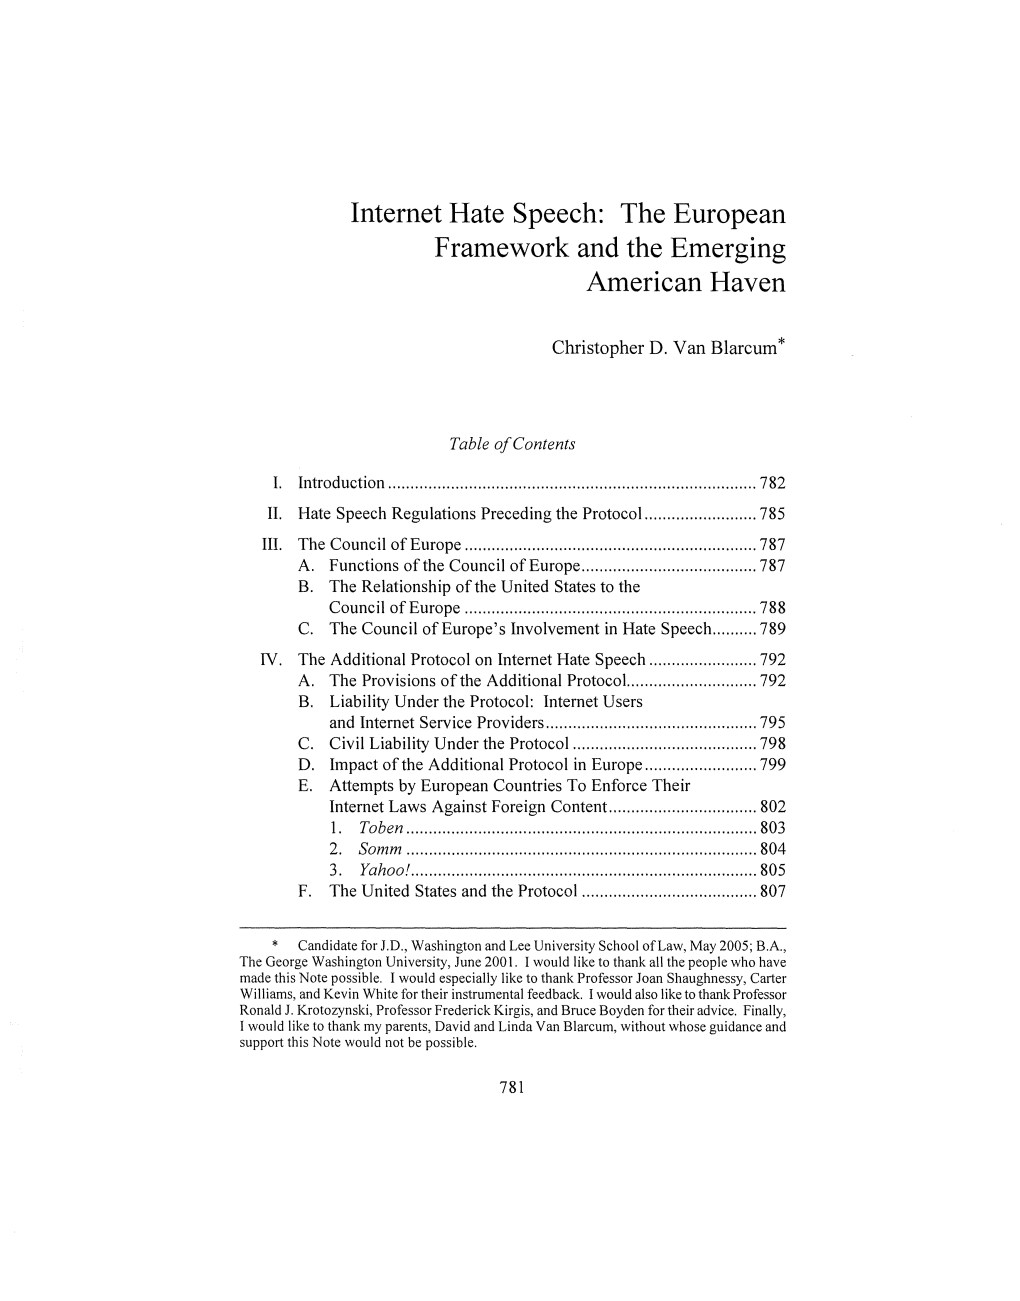 Internet Hate Speech: the European Framework and the Emerging American Haven